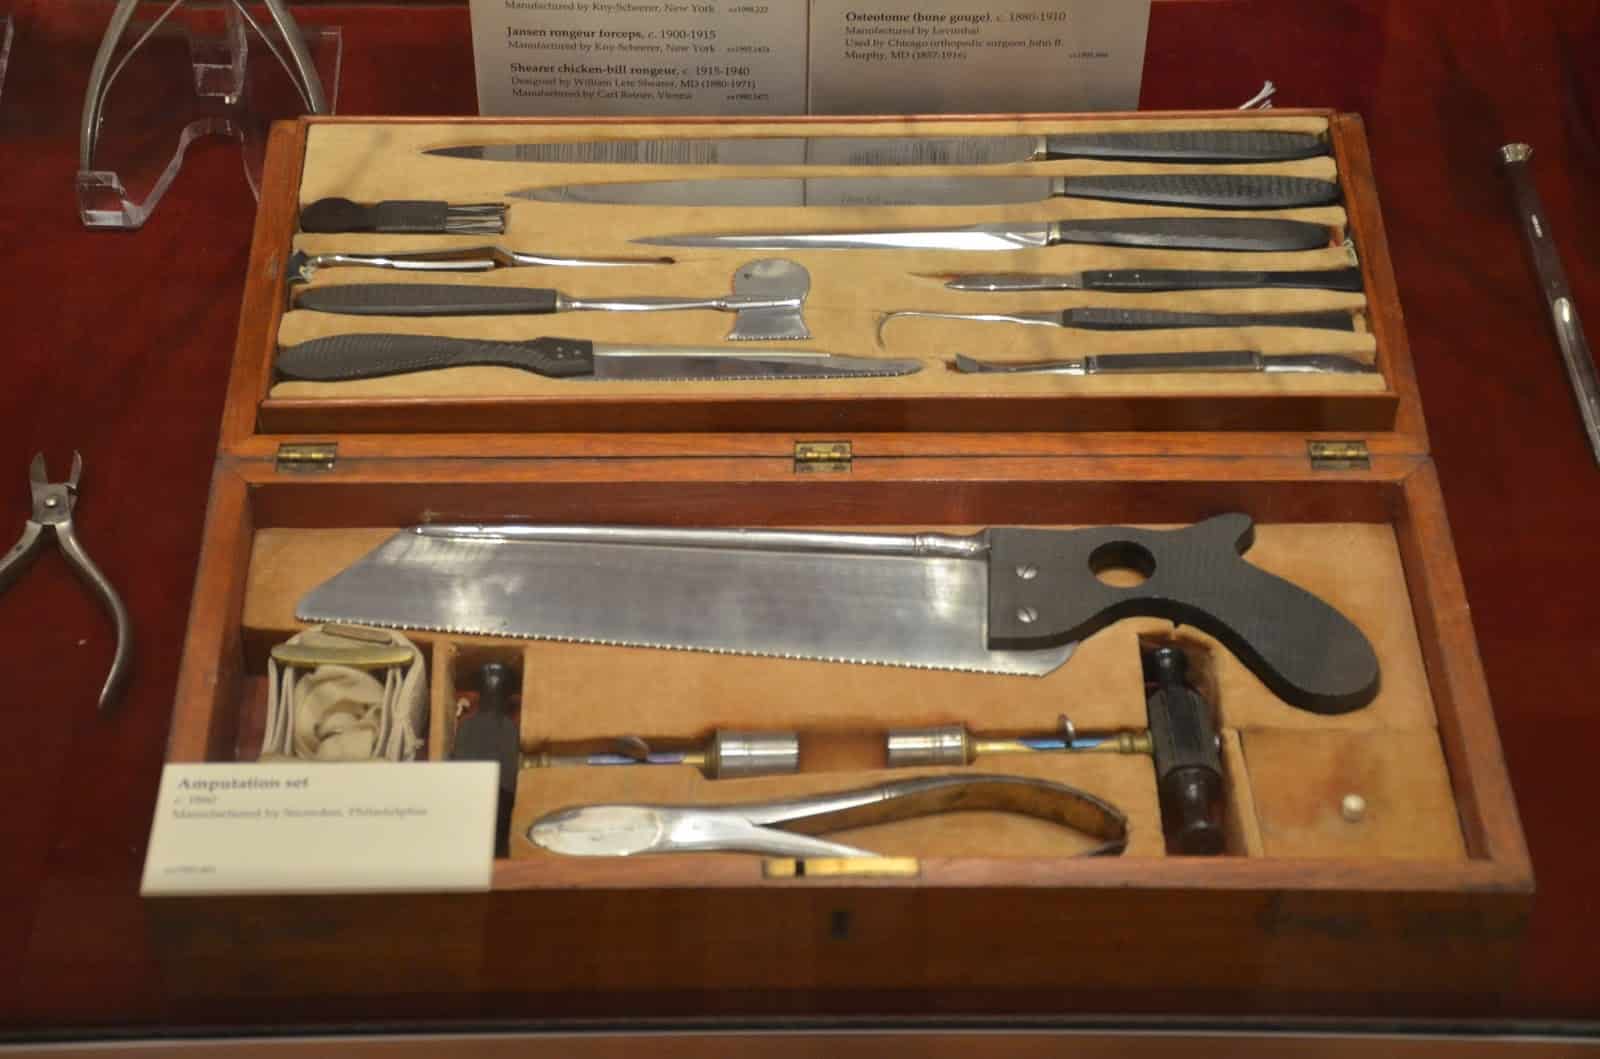 Amputation kit at the International Museum of Surgical Science, Gold Coast Chicago